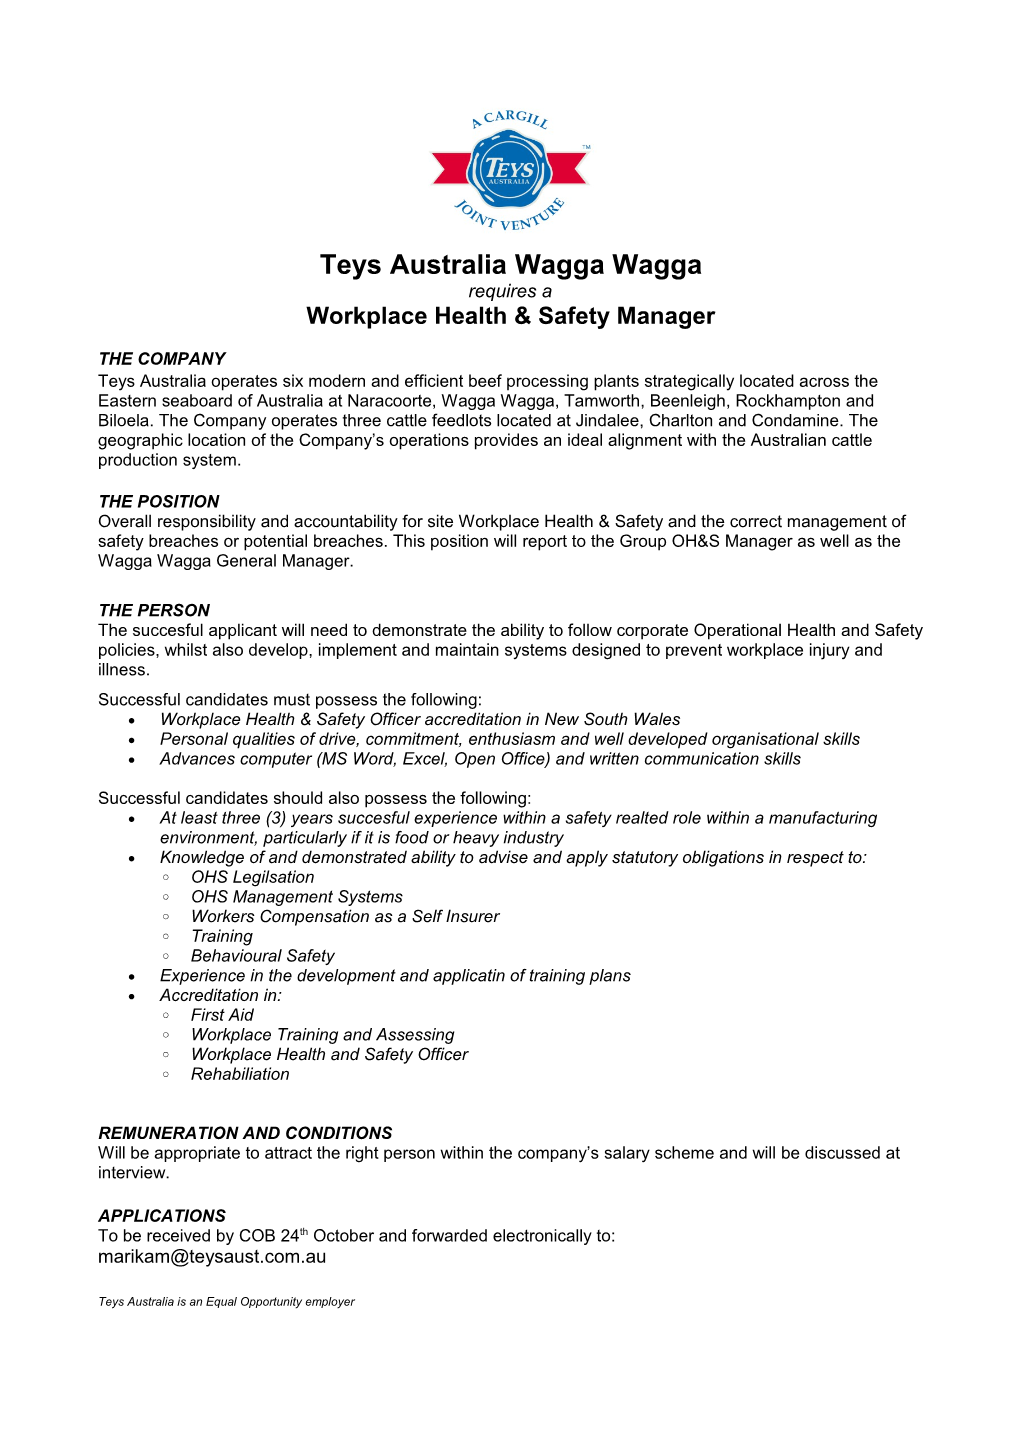 Teys Australia Wagga Wagga Requires a Workplace Health & Safety Manager